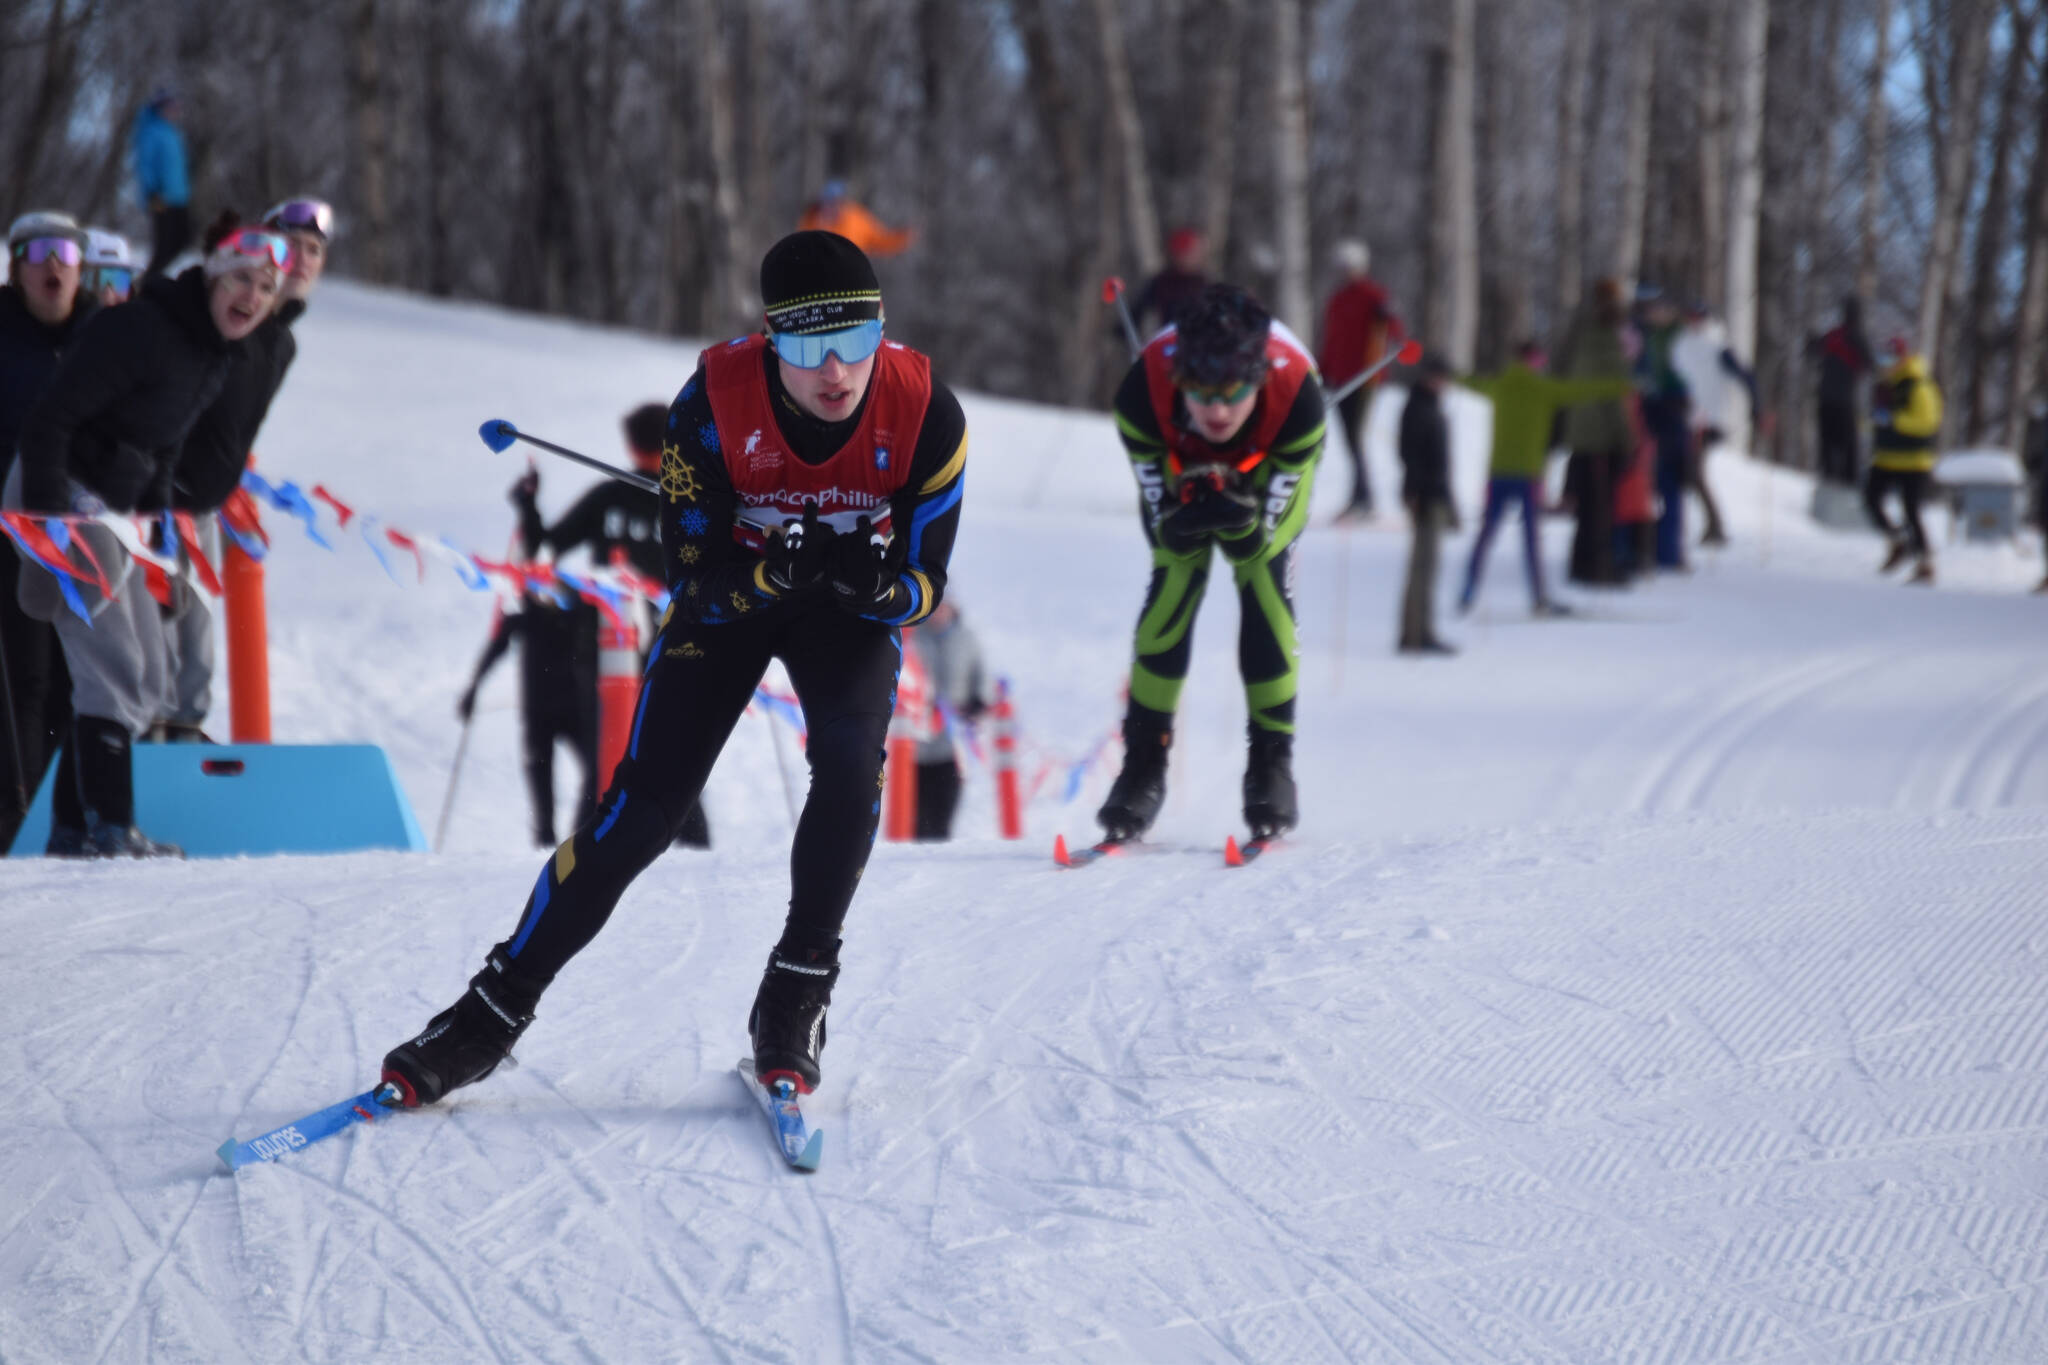 Photos by Jake Dye/Peninsula Clarion
Homer’s Garrett Briscoe tucks for a downhill, closely pursued by Colony’s Clayton Steer, during the first leg of the boys 4x5-kilometer relay at the ASAA State Nordic Ski Championships at Kincaid Park in Anchorage, Alaska, on Saturday, Feb. 25, 2023.